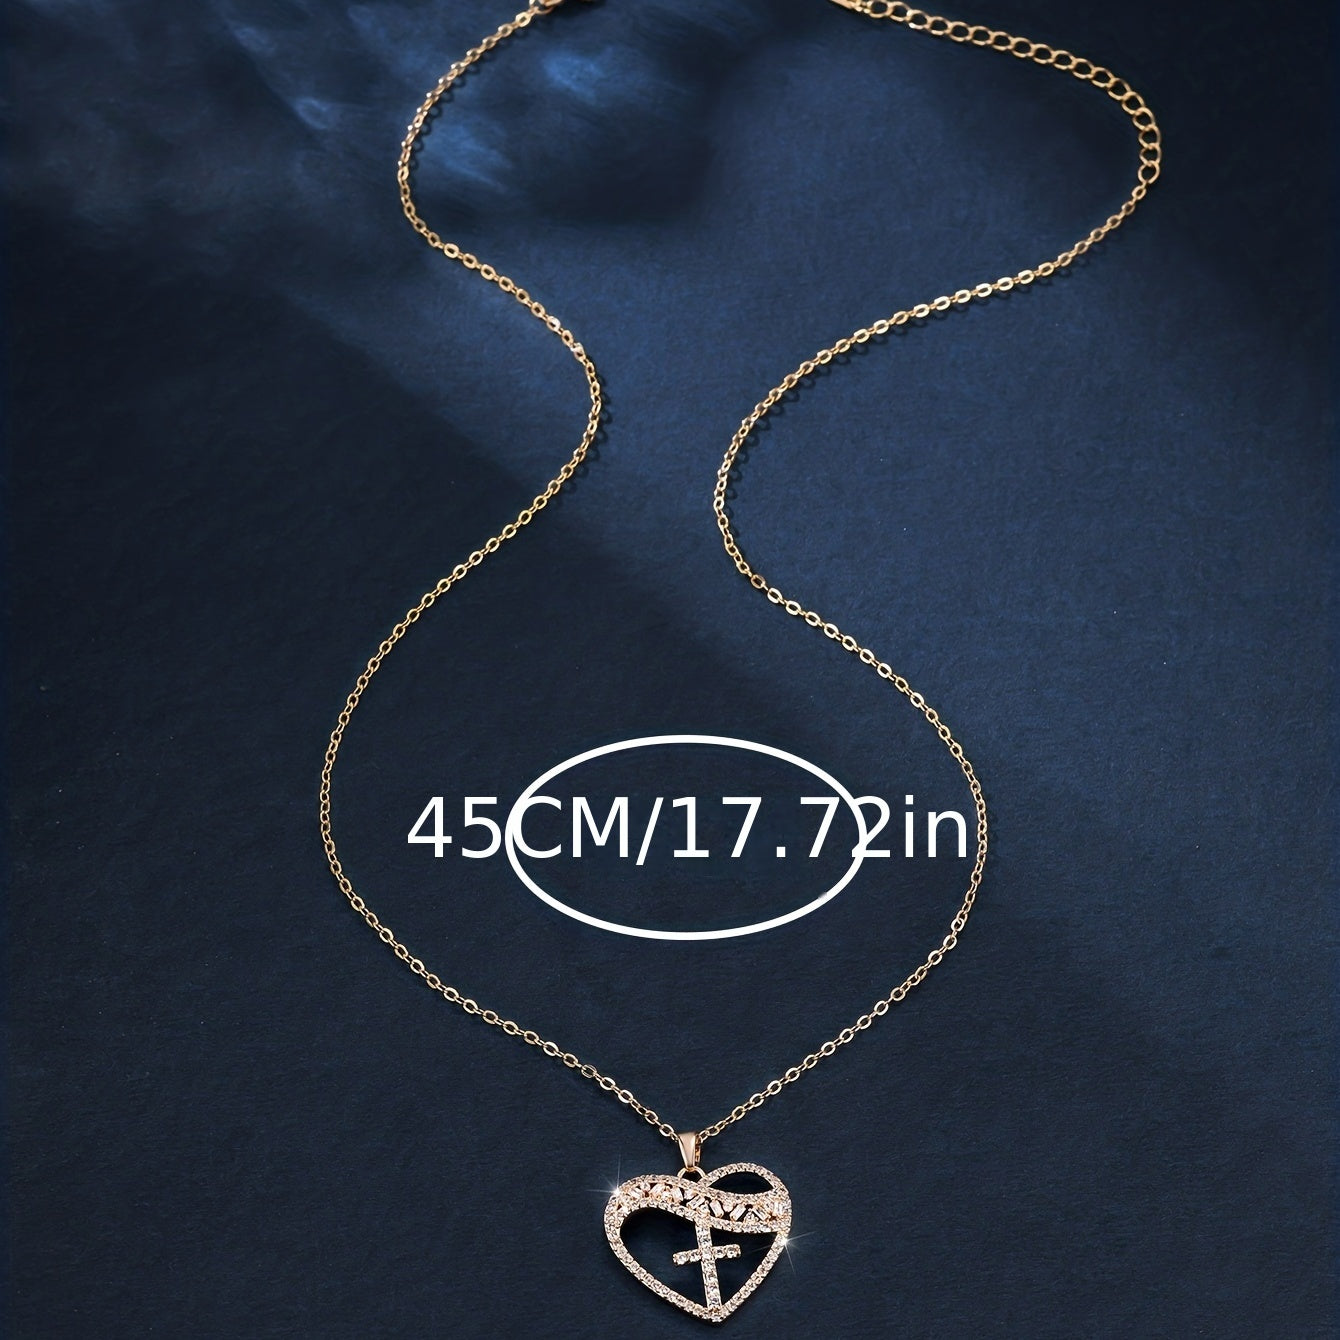 Show Your Love with this Unique Heart-Shaped Cross Pattern Pendant - Perfect Mother's Day Gift!